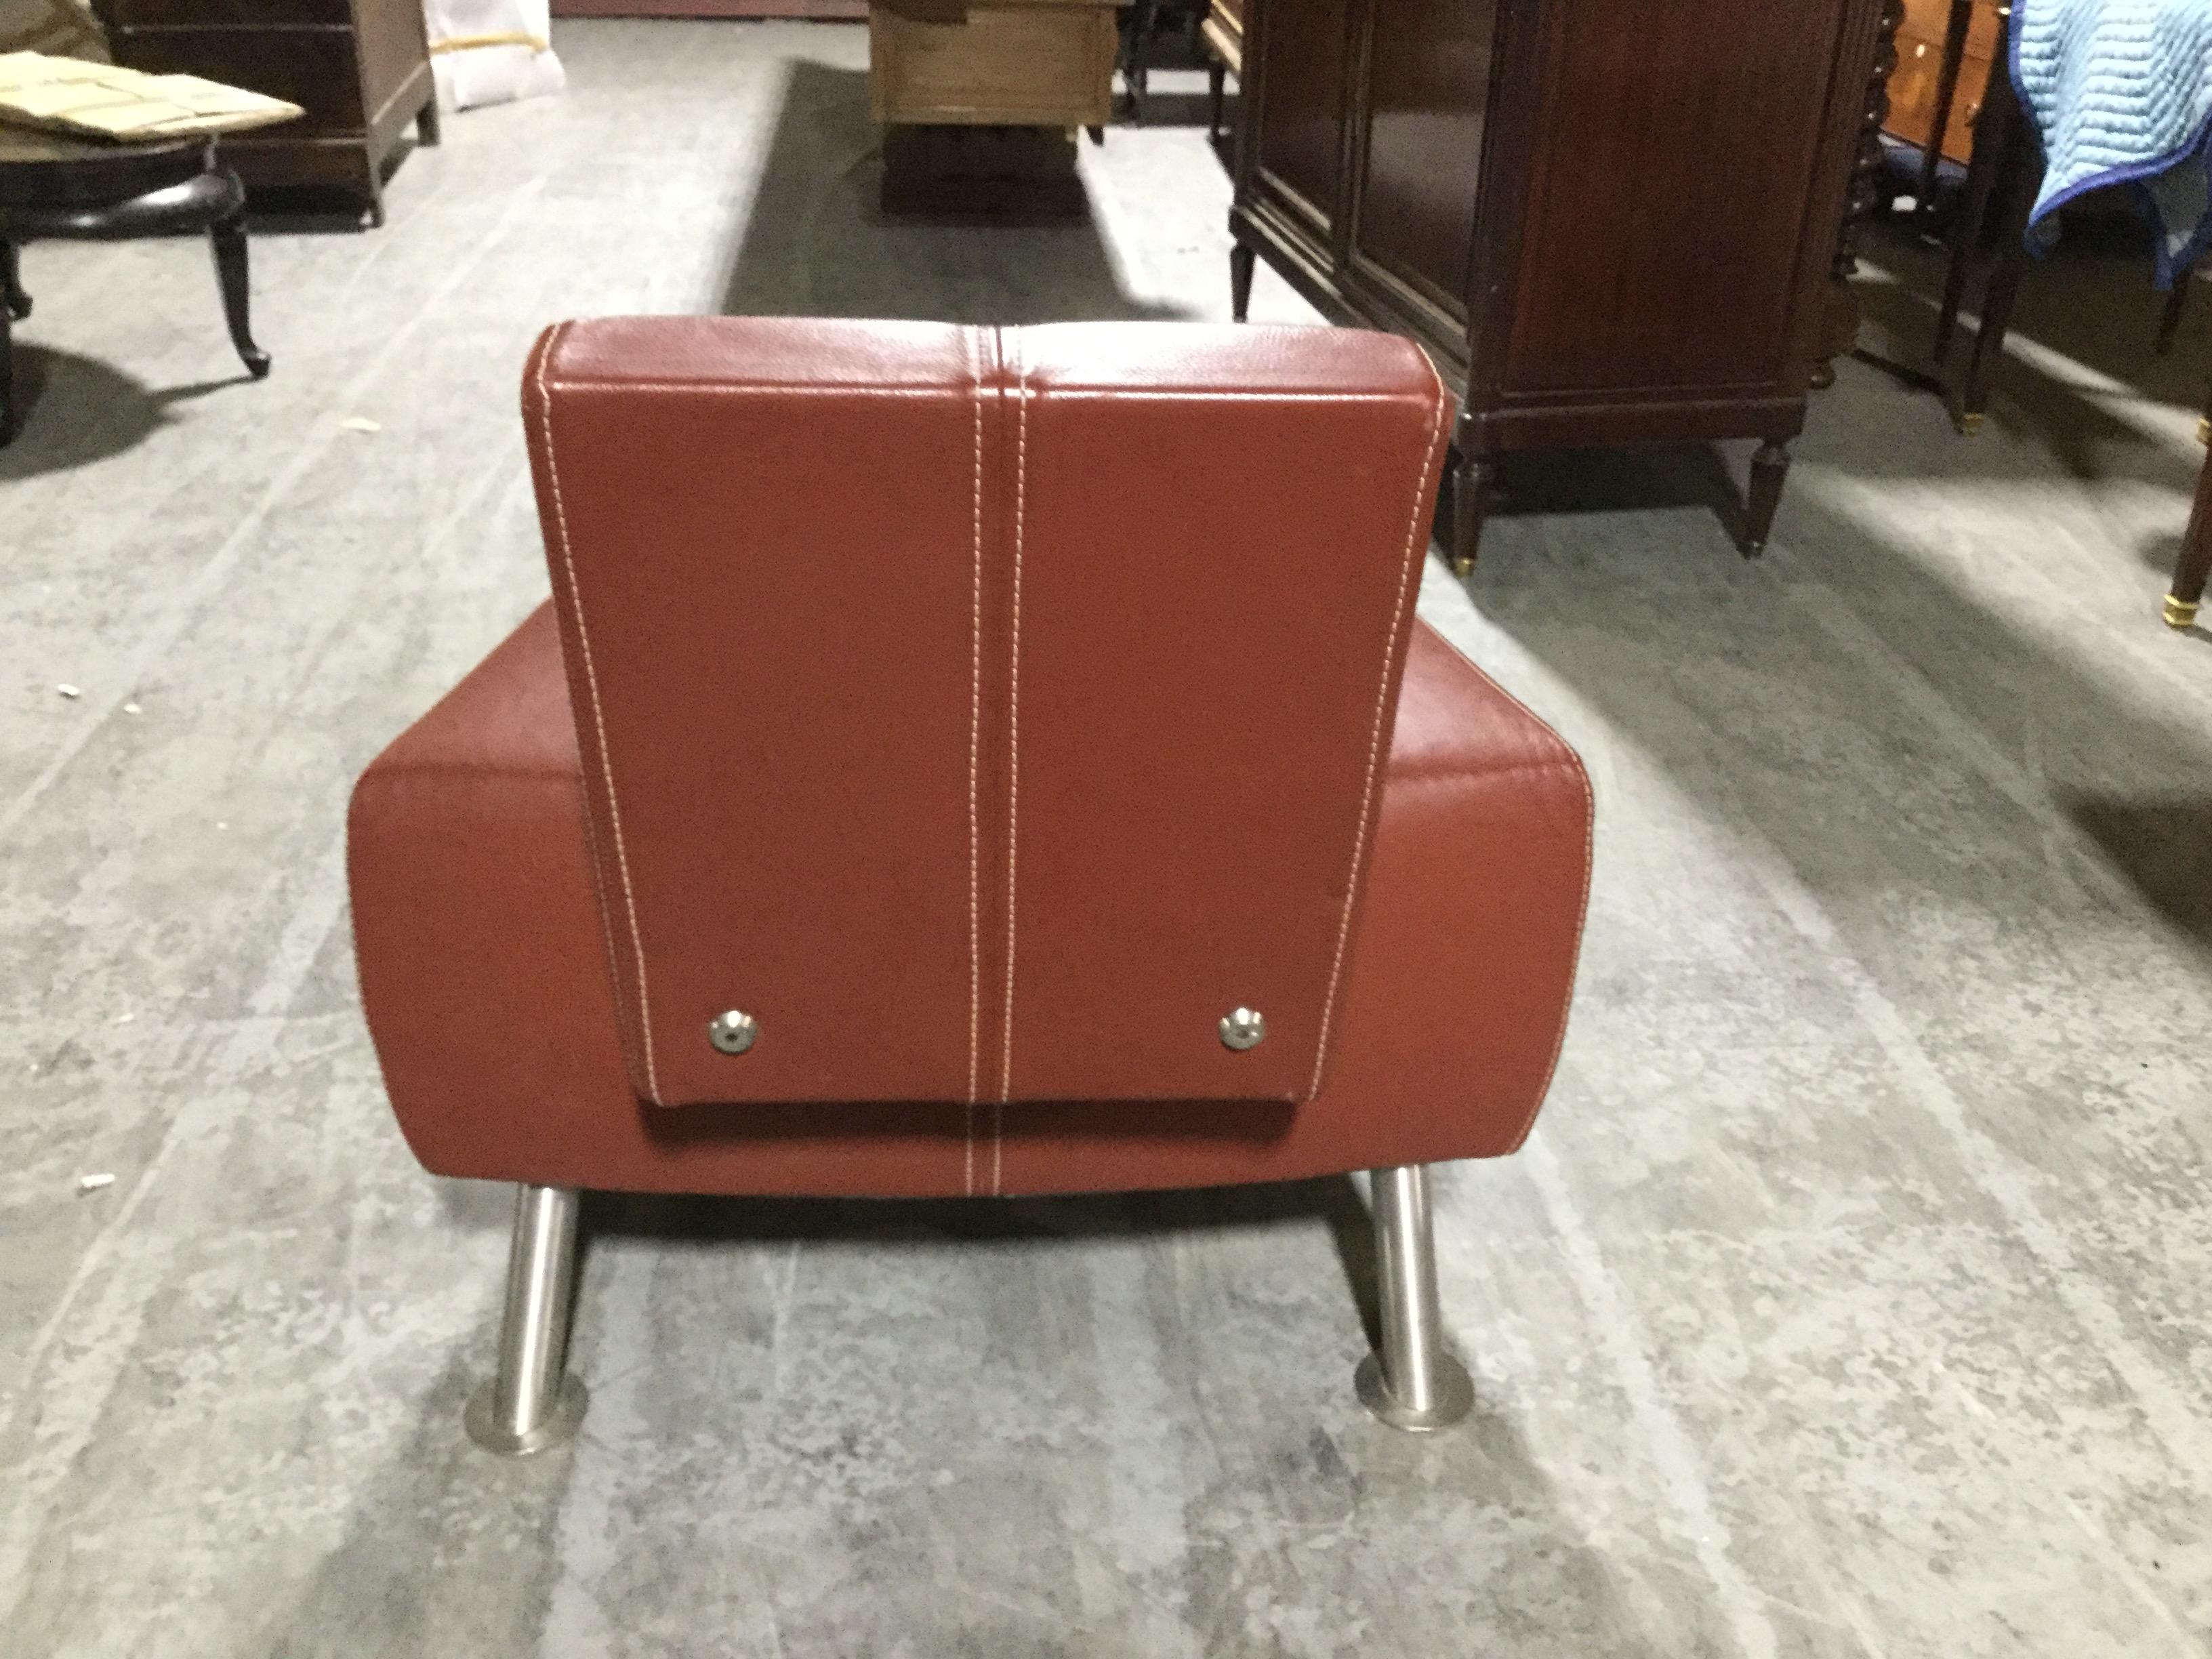 3 Piece Italian Industrial Leather and Chrome Salon In Good Condition For Sale In Livingston, NJ